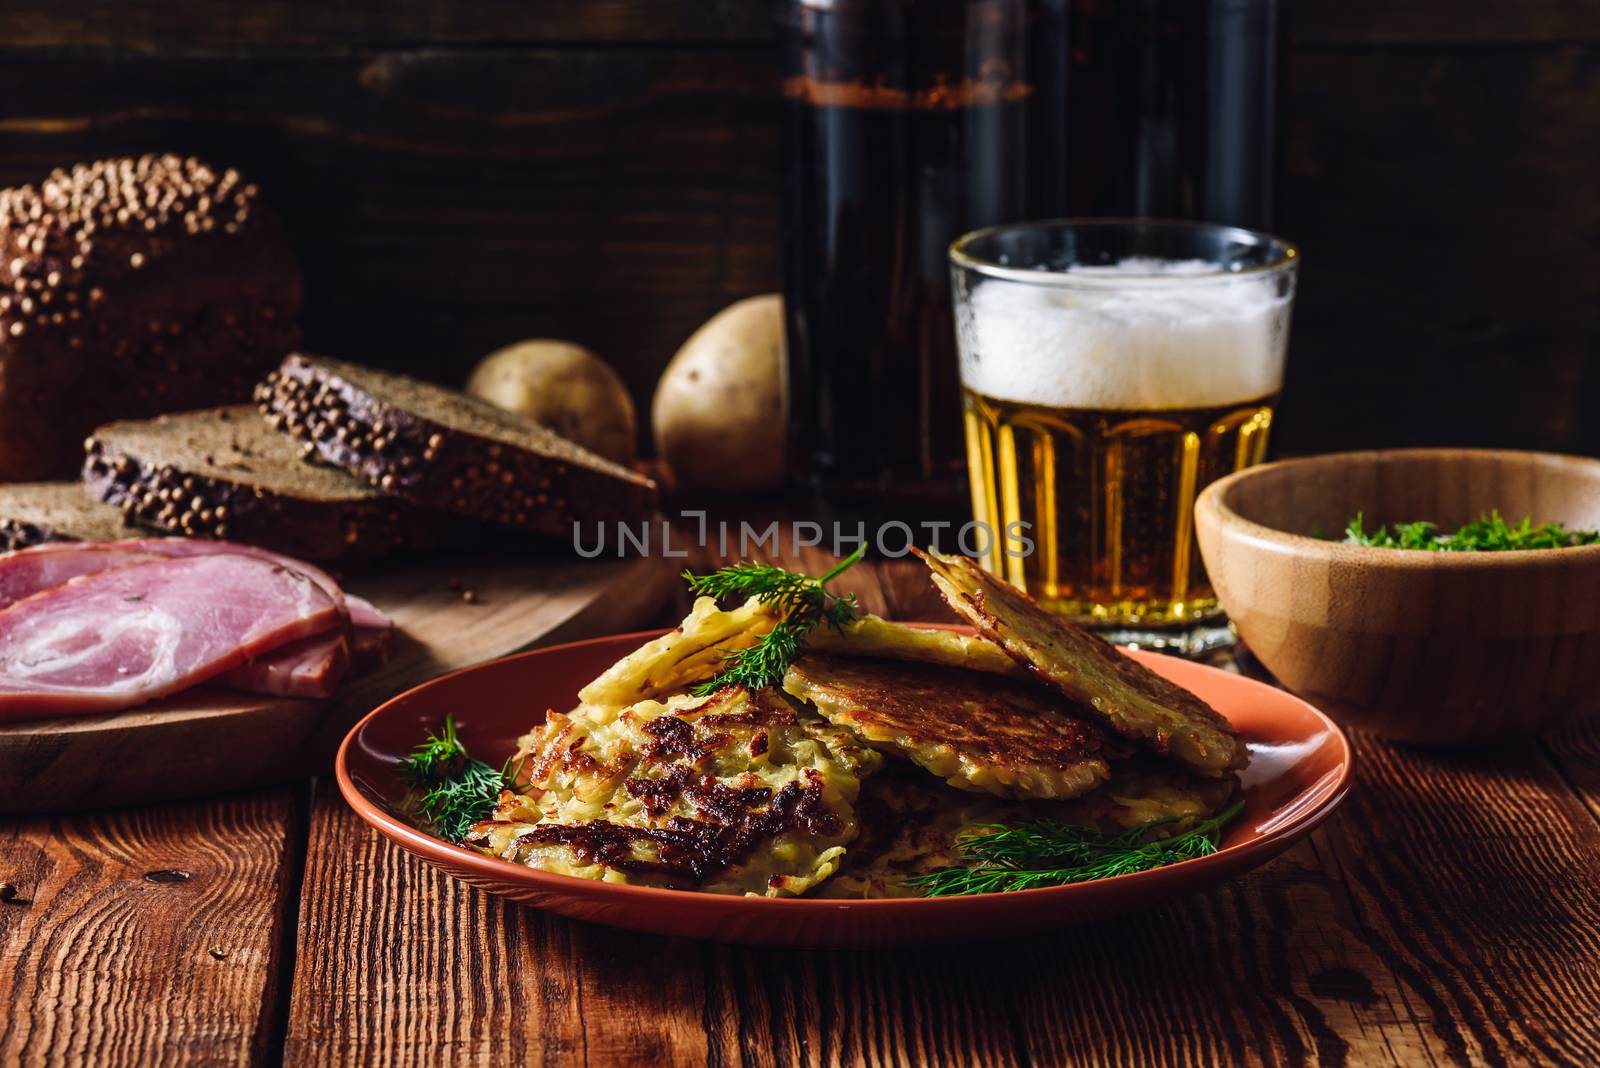 Potato Pancakes with Other Snacks and Beer by Seva_blsv